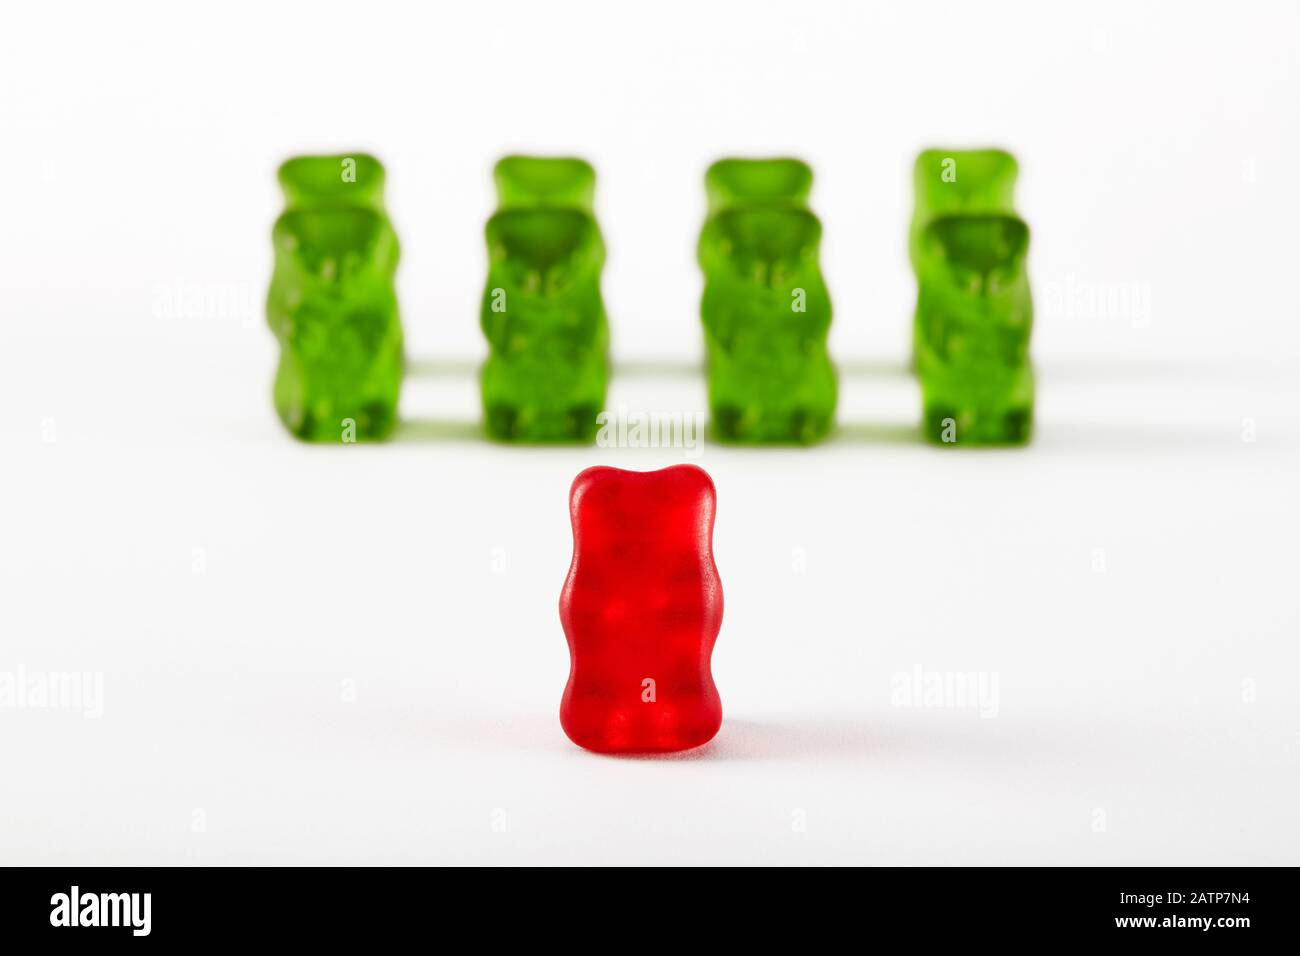 Gummy bear candies designed as a military troop. Commander leader inspecting the troops. Stock Photo